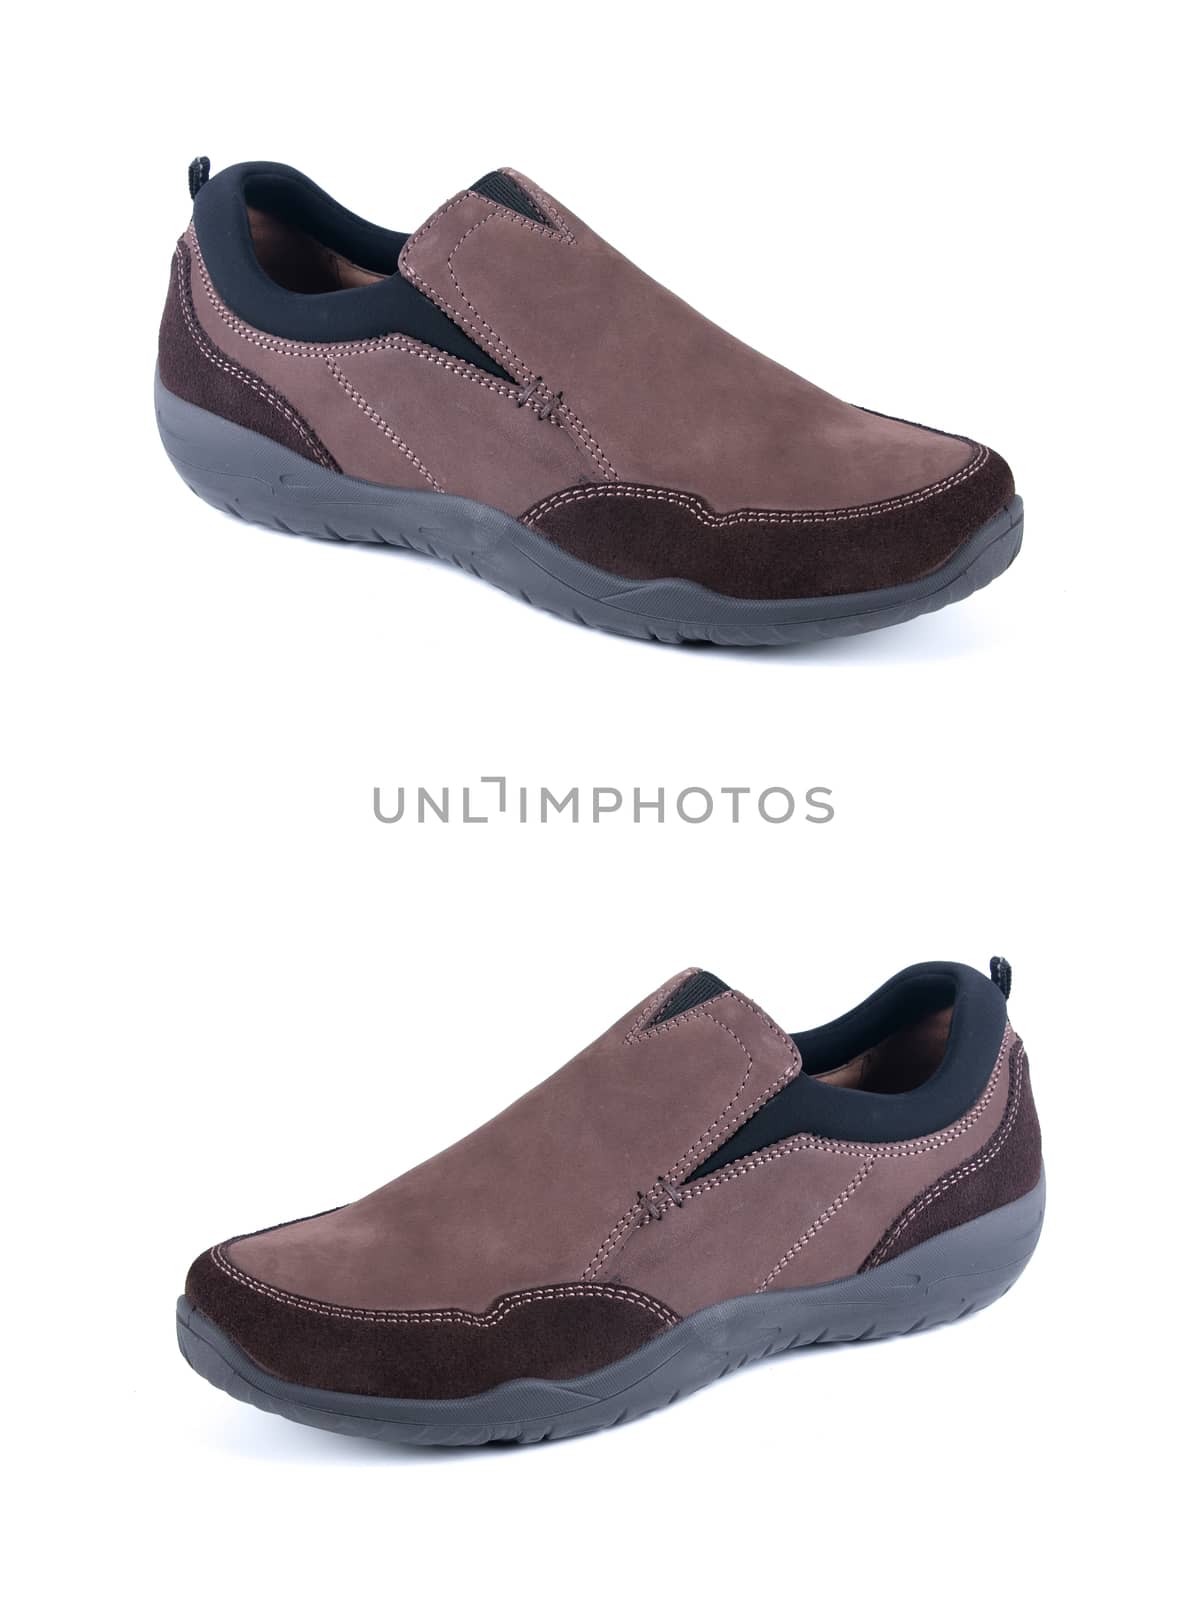 Pair of brown leather shoe on white background, isolated product.